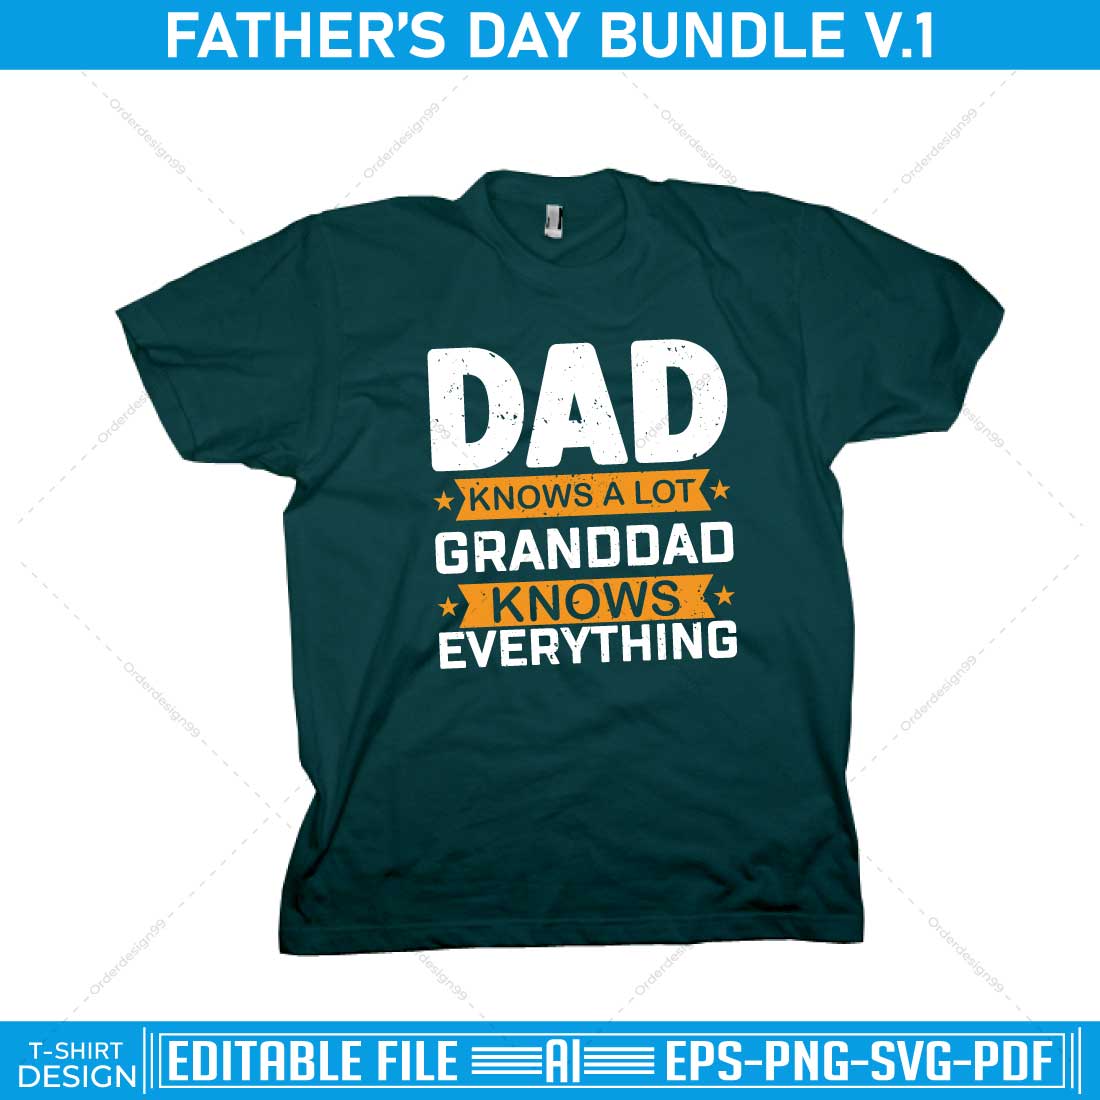 Father's Day T-shirt Bundle V1 preview image.